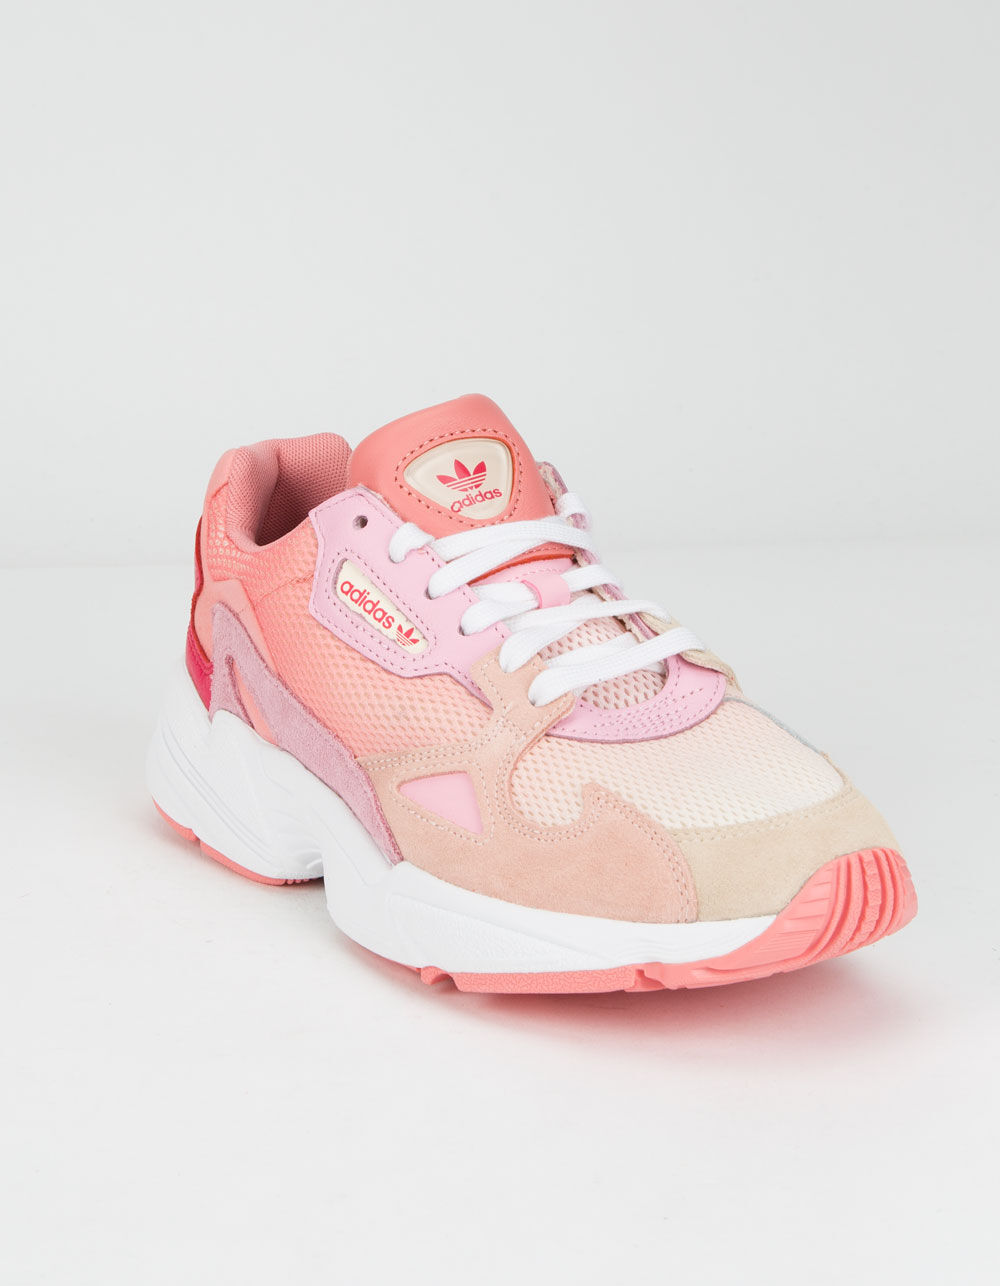 ADIDAS Falcon Ecru Tint & Icey Pink Womens Shoes image number 1